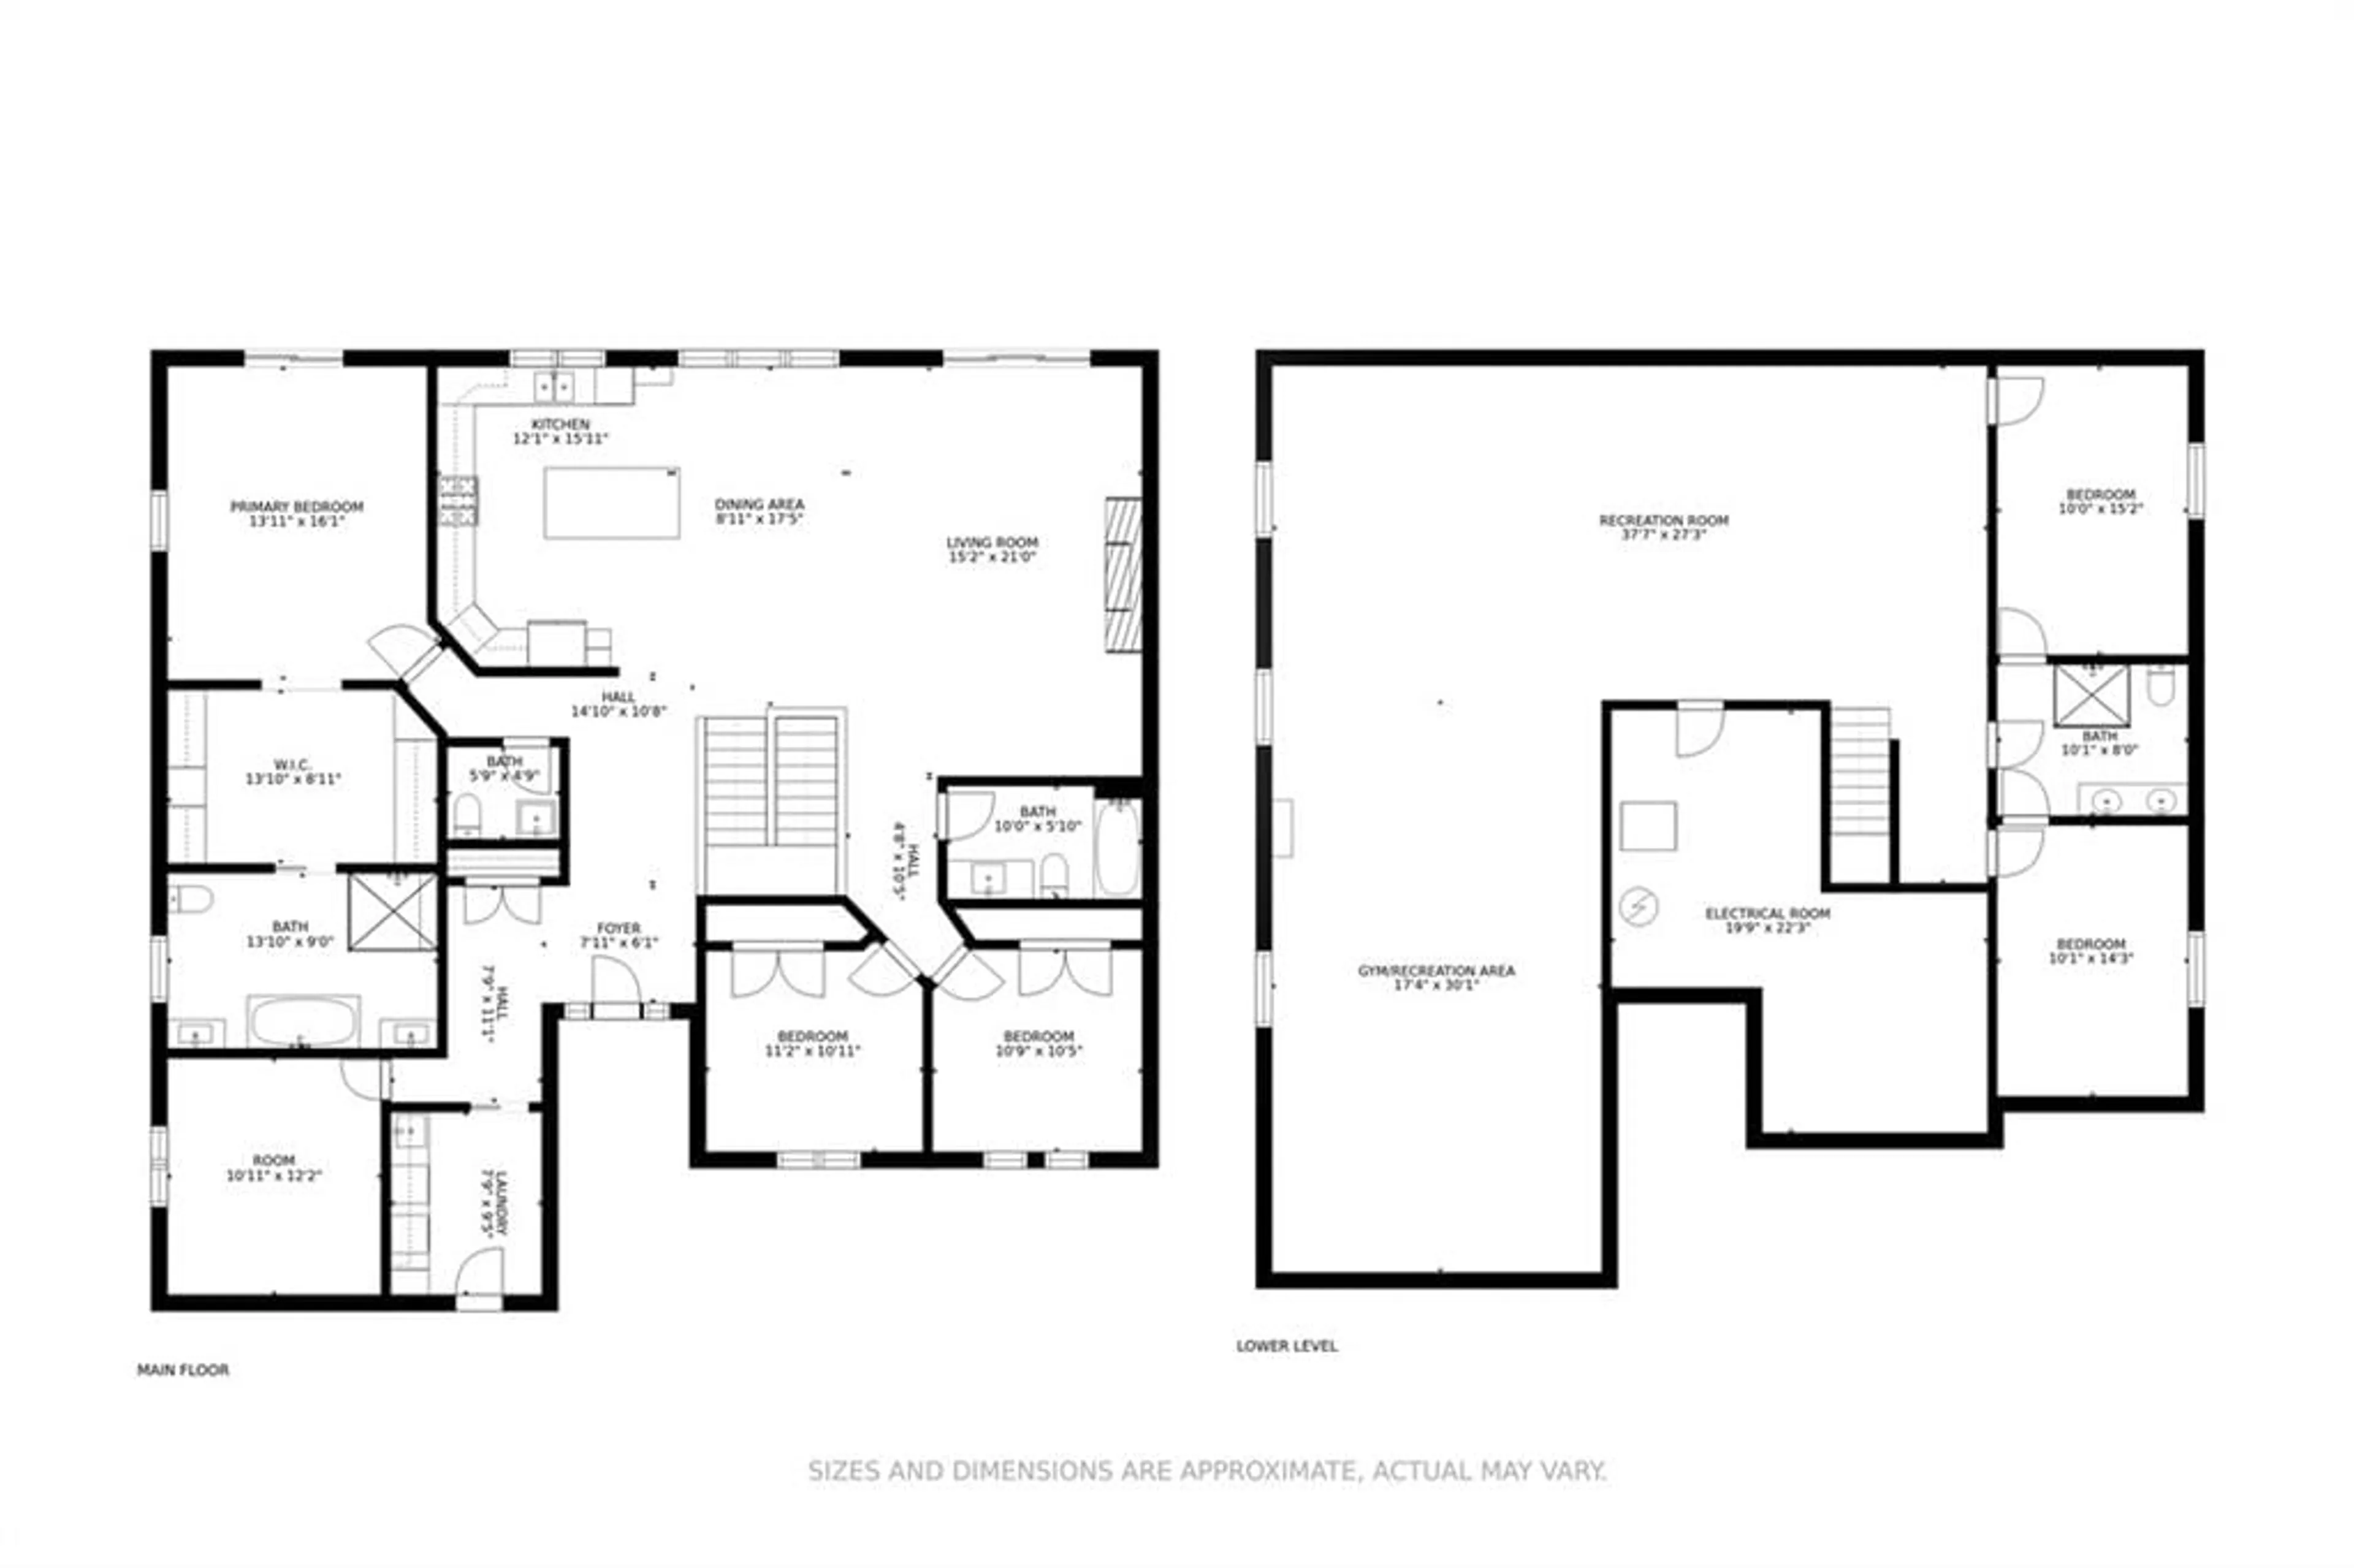 Floor plan for 244 Lakeshore Road West Rd, Simcoe Ontario L0L 2E0